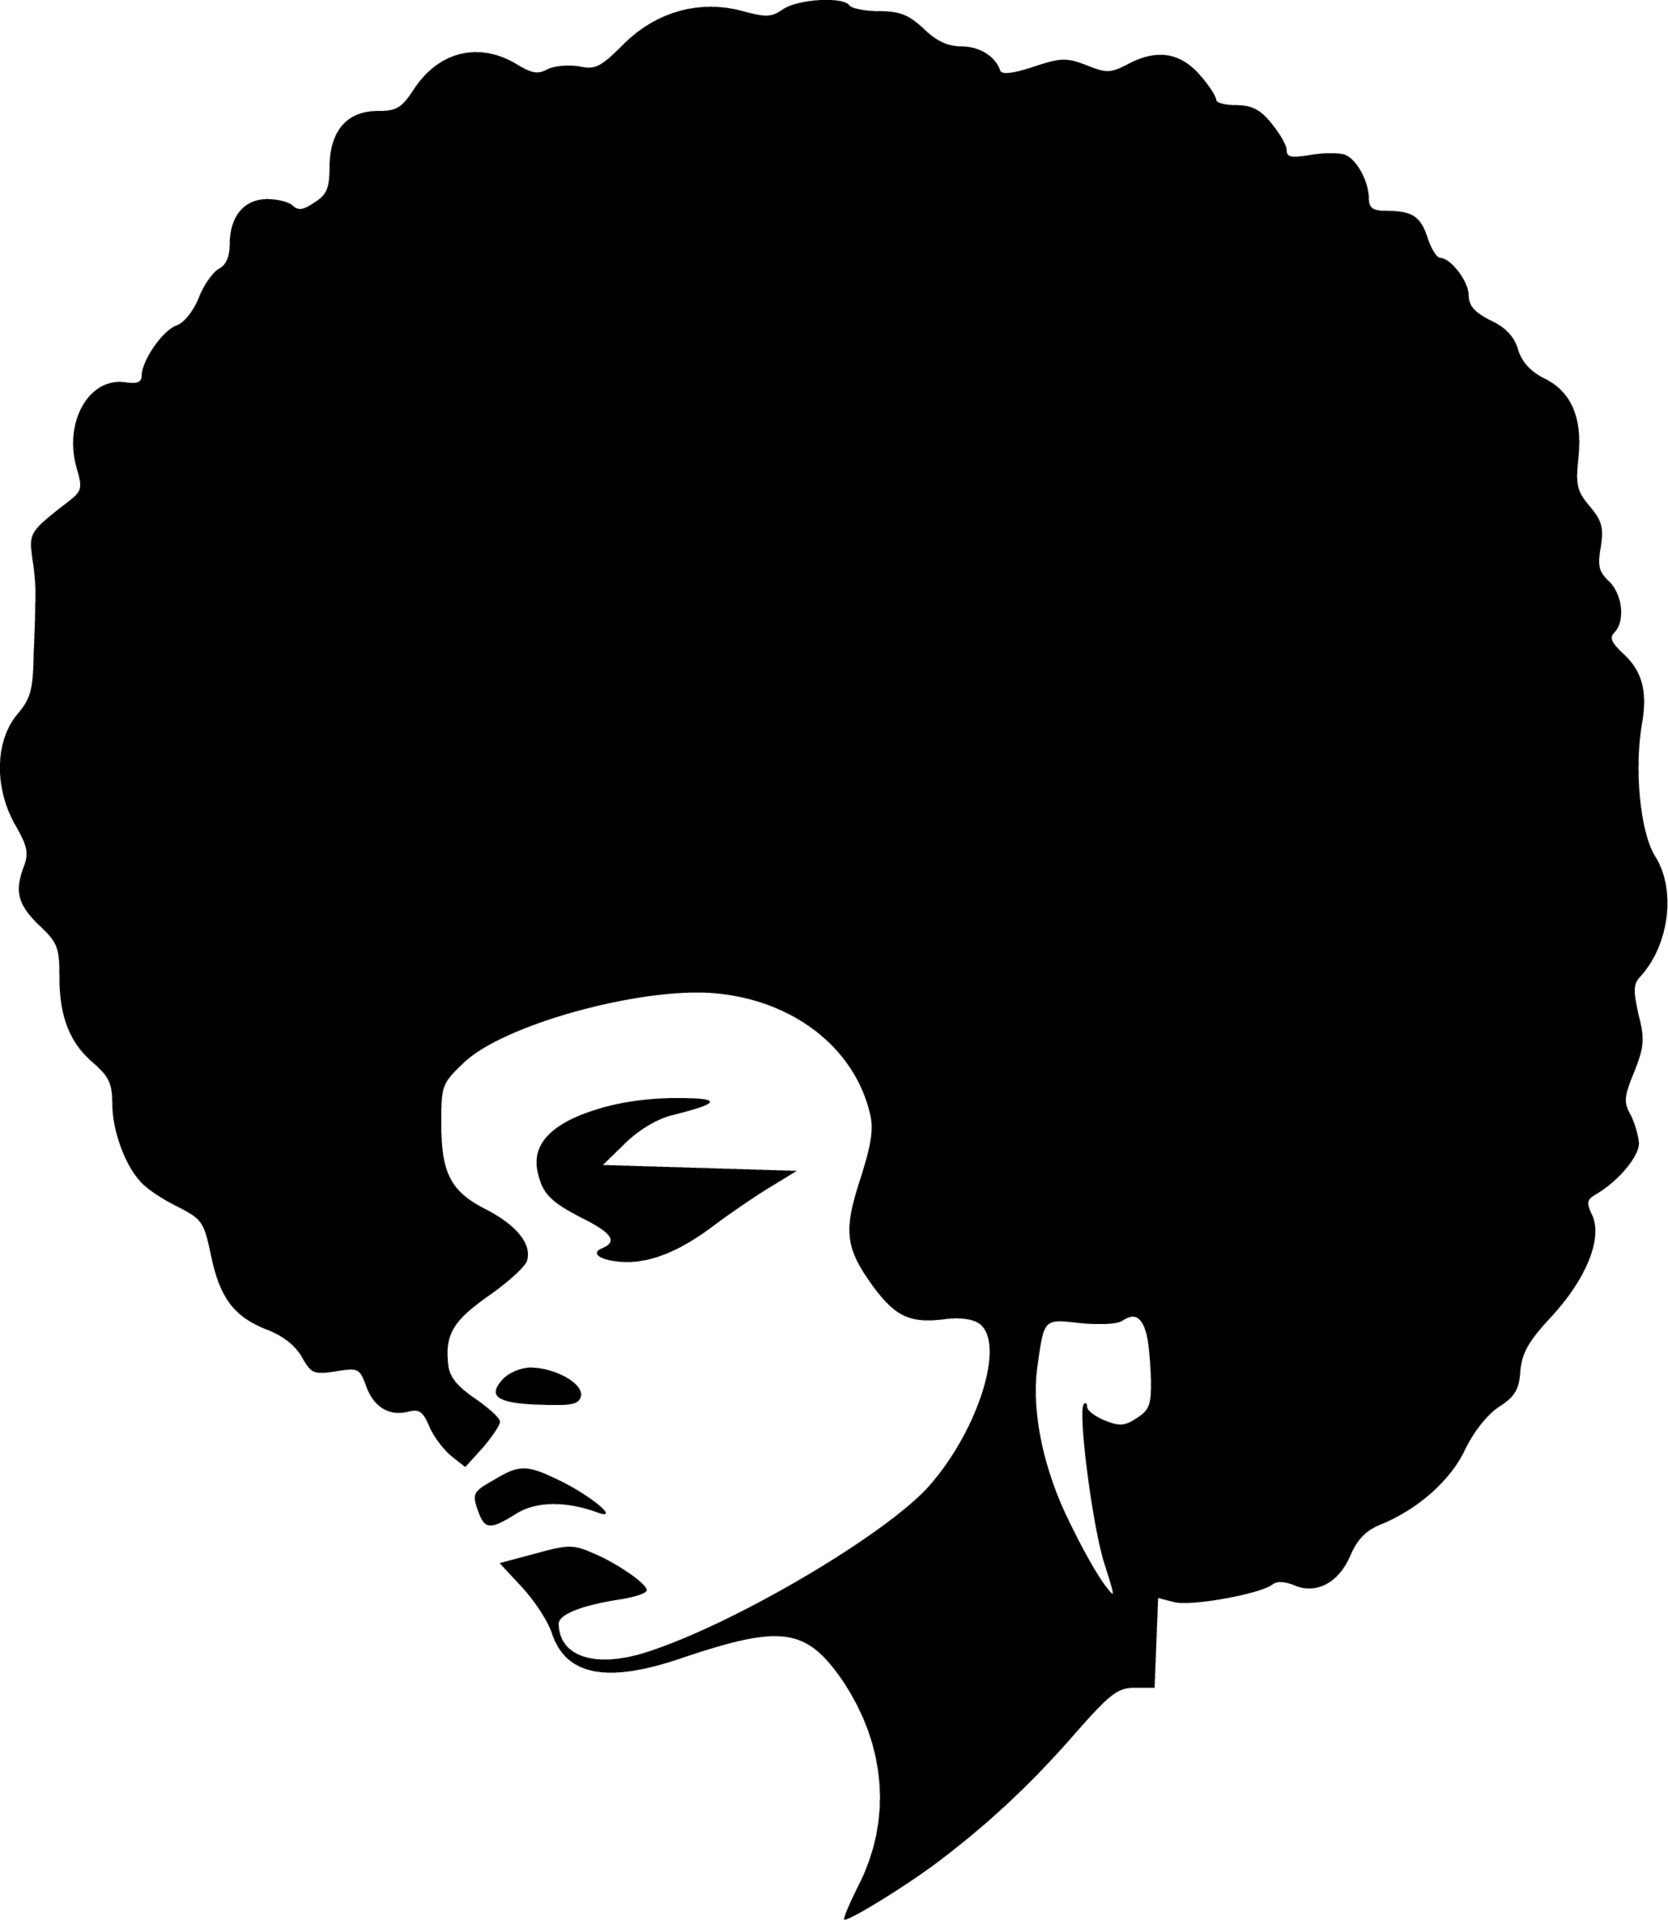 Afro, Minimalist and Simple Silhouette - Vector illustration 24162081 ...